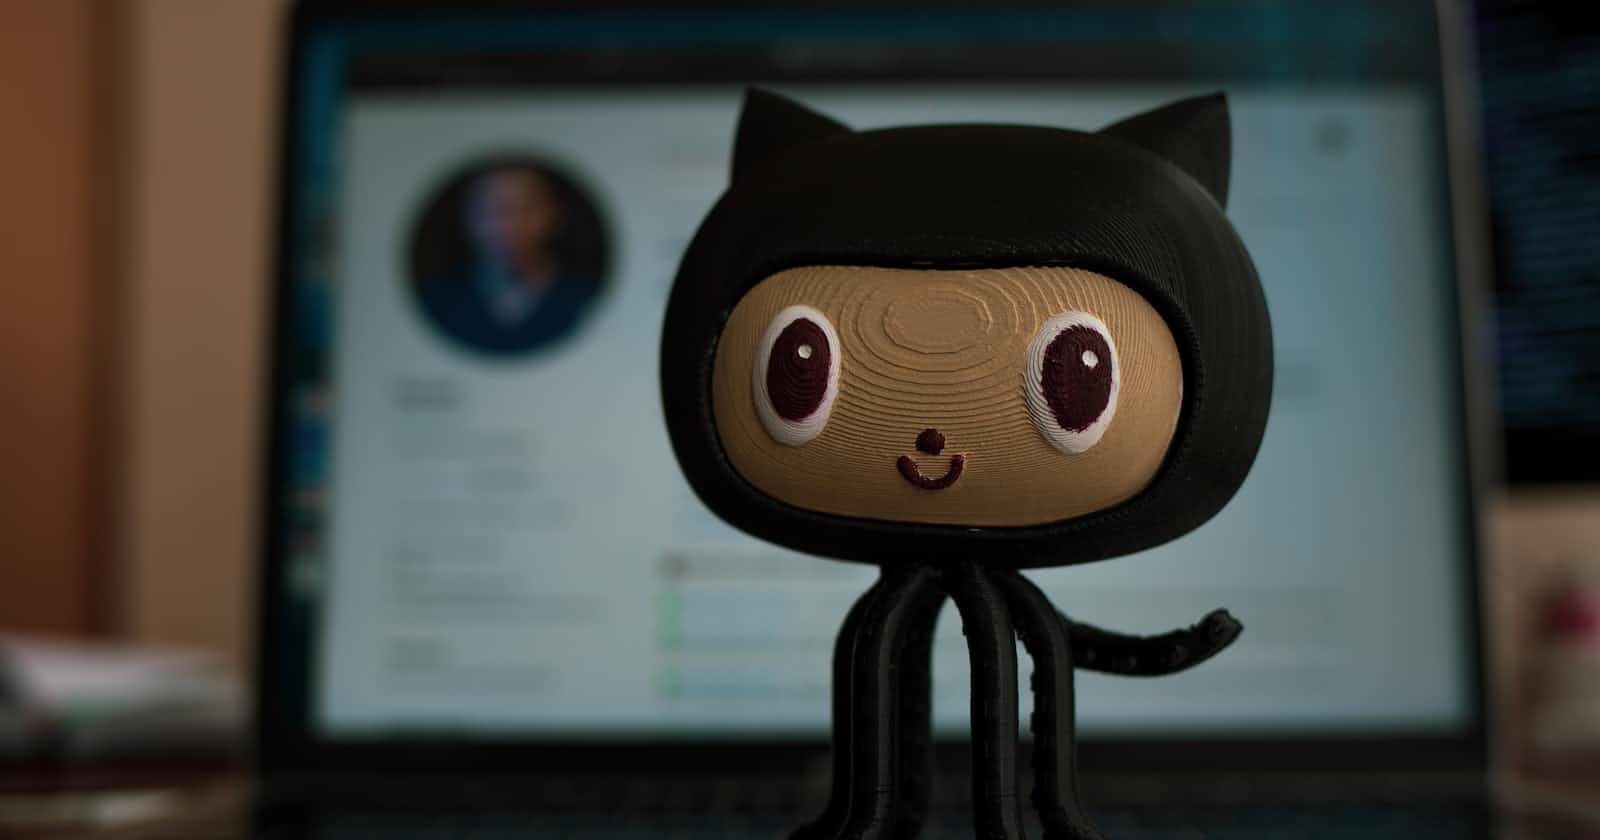 GitHub Pages Not Displaying My Website? Here's What You Need to Know